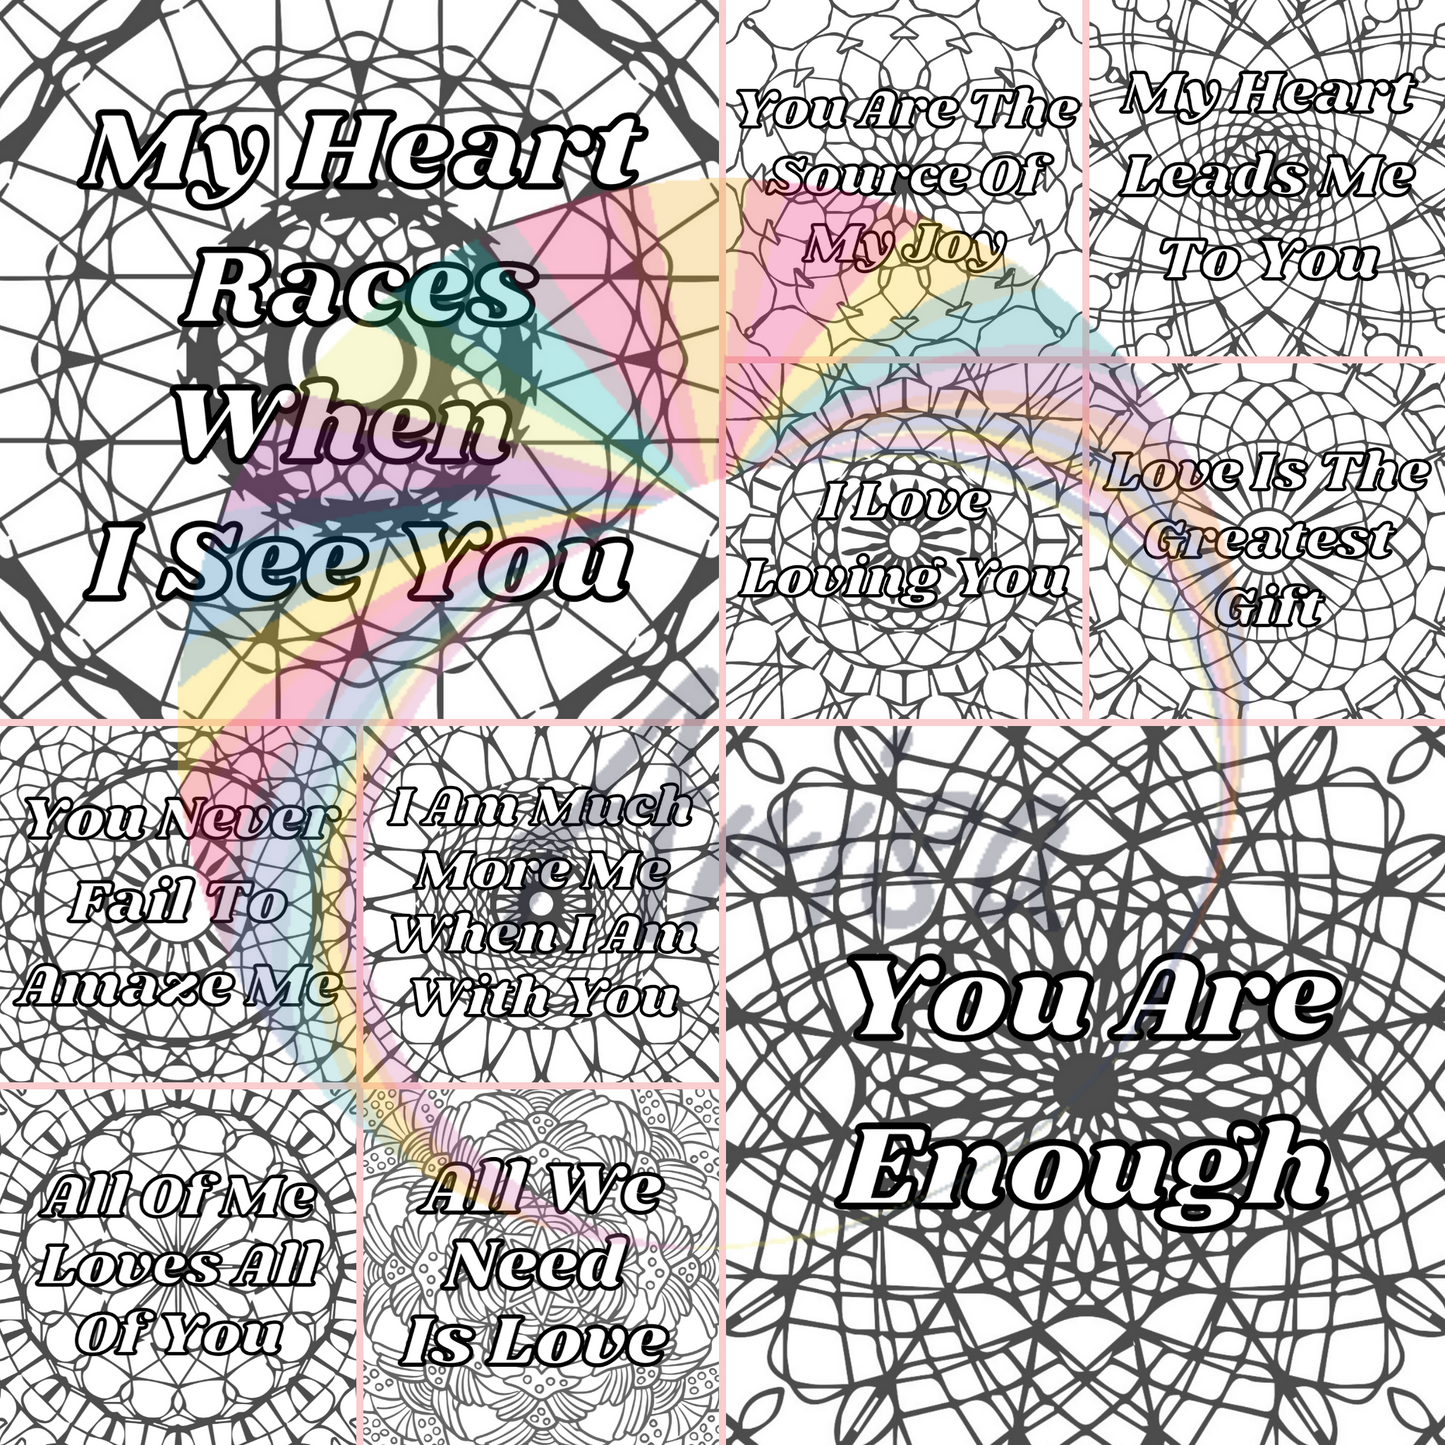 The mandalas of the True Love Quote Mandala Coloring Pages Pack-8.5x11 by ArisaTeam at a glance